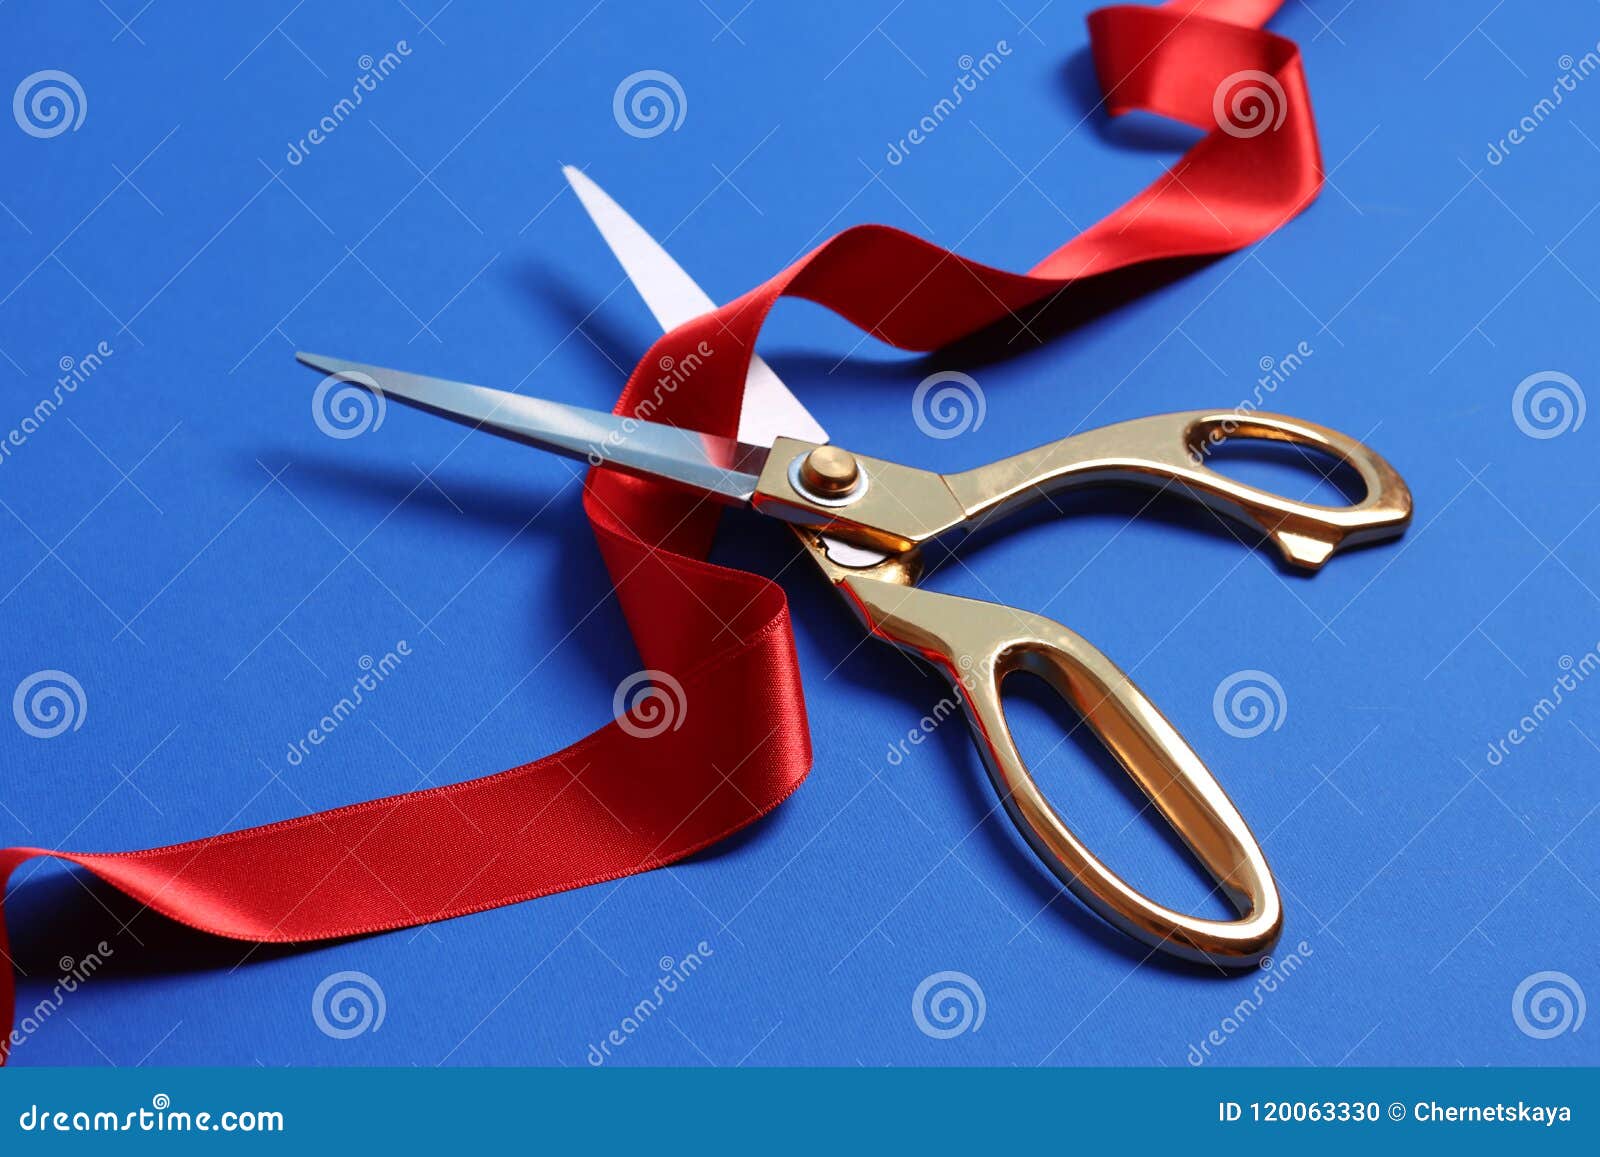 Ribbon and Scissors on Color Background Stock Photo - Image of